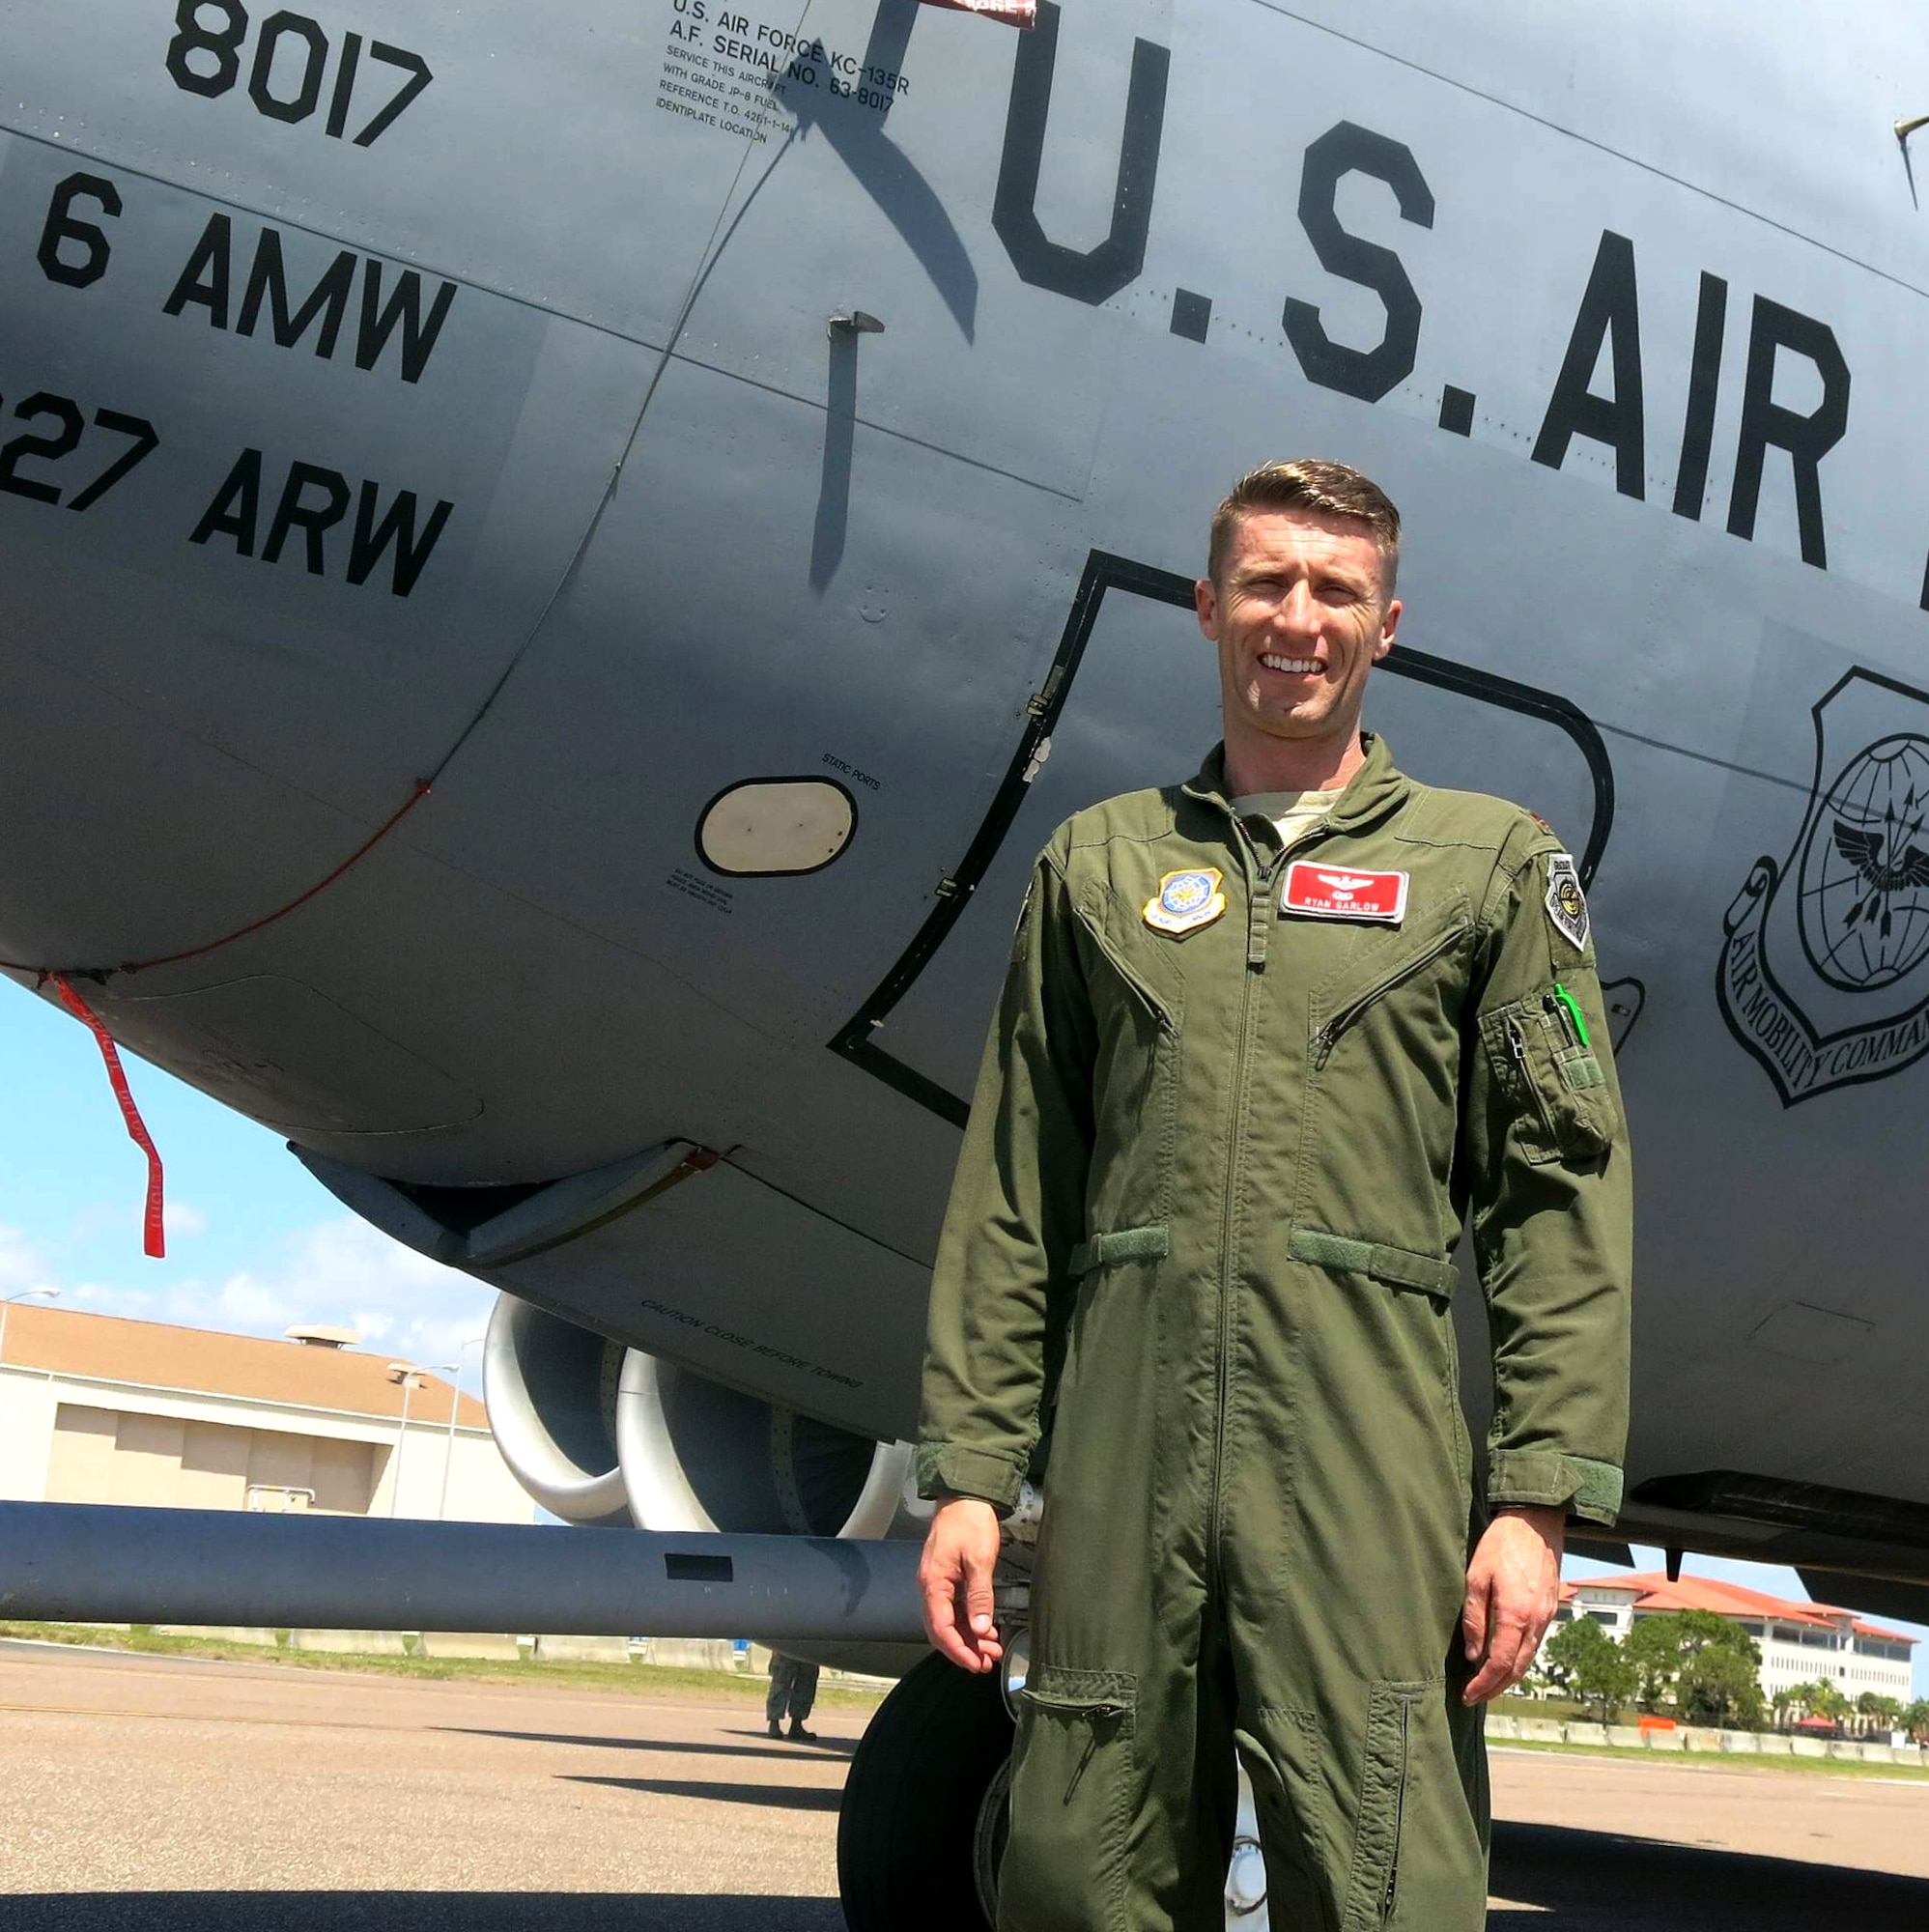 U.S Air Force Maj. Ryan Garlow, 6th Aircraft Maintenance Squadron commander, poses in front of a KC-135 Stratotanker aircraft before Tampa Bay AirFest 2016 at MacDill Air Force Base, Fla. March 18, 2016.